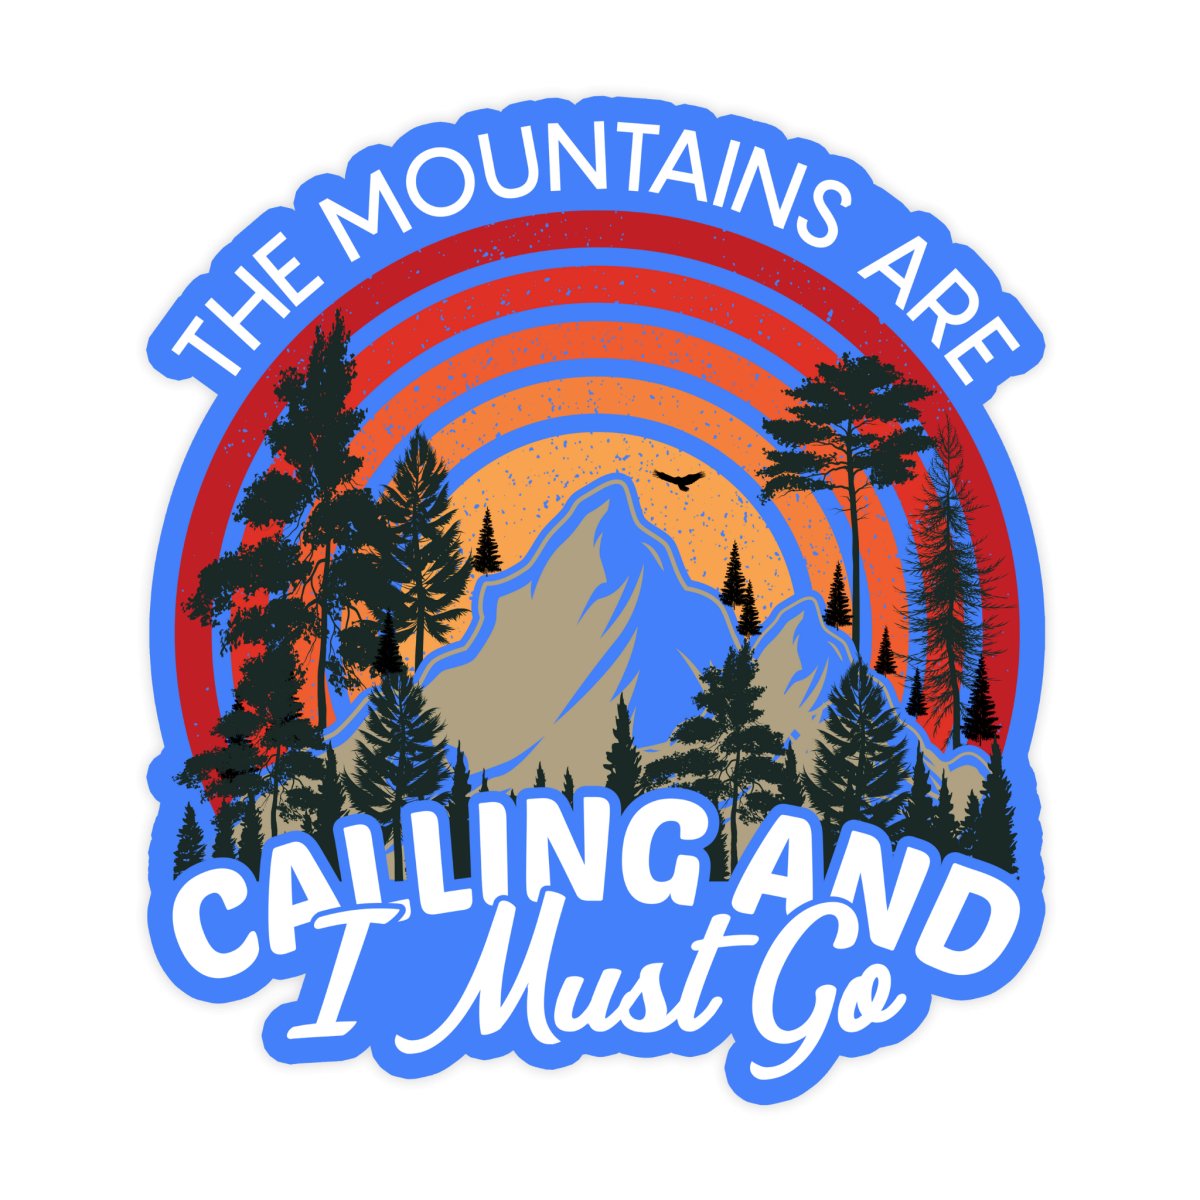 The Mountains Are Calling And I Must Go Sticker - stickerbullThe Mountains Are Calling And I Must Go StickerRetail StickerstickerbullstickerbullSage_MountainsCalling [#200]The Mountains Are Calling And I Must Go Sticker